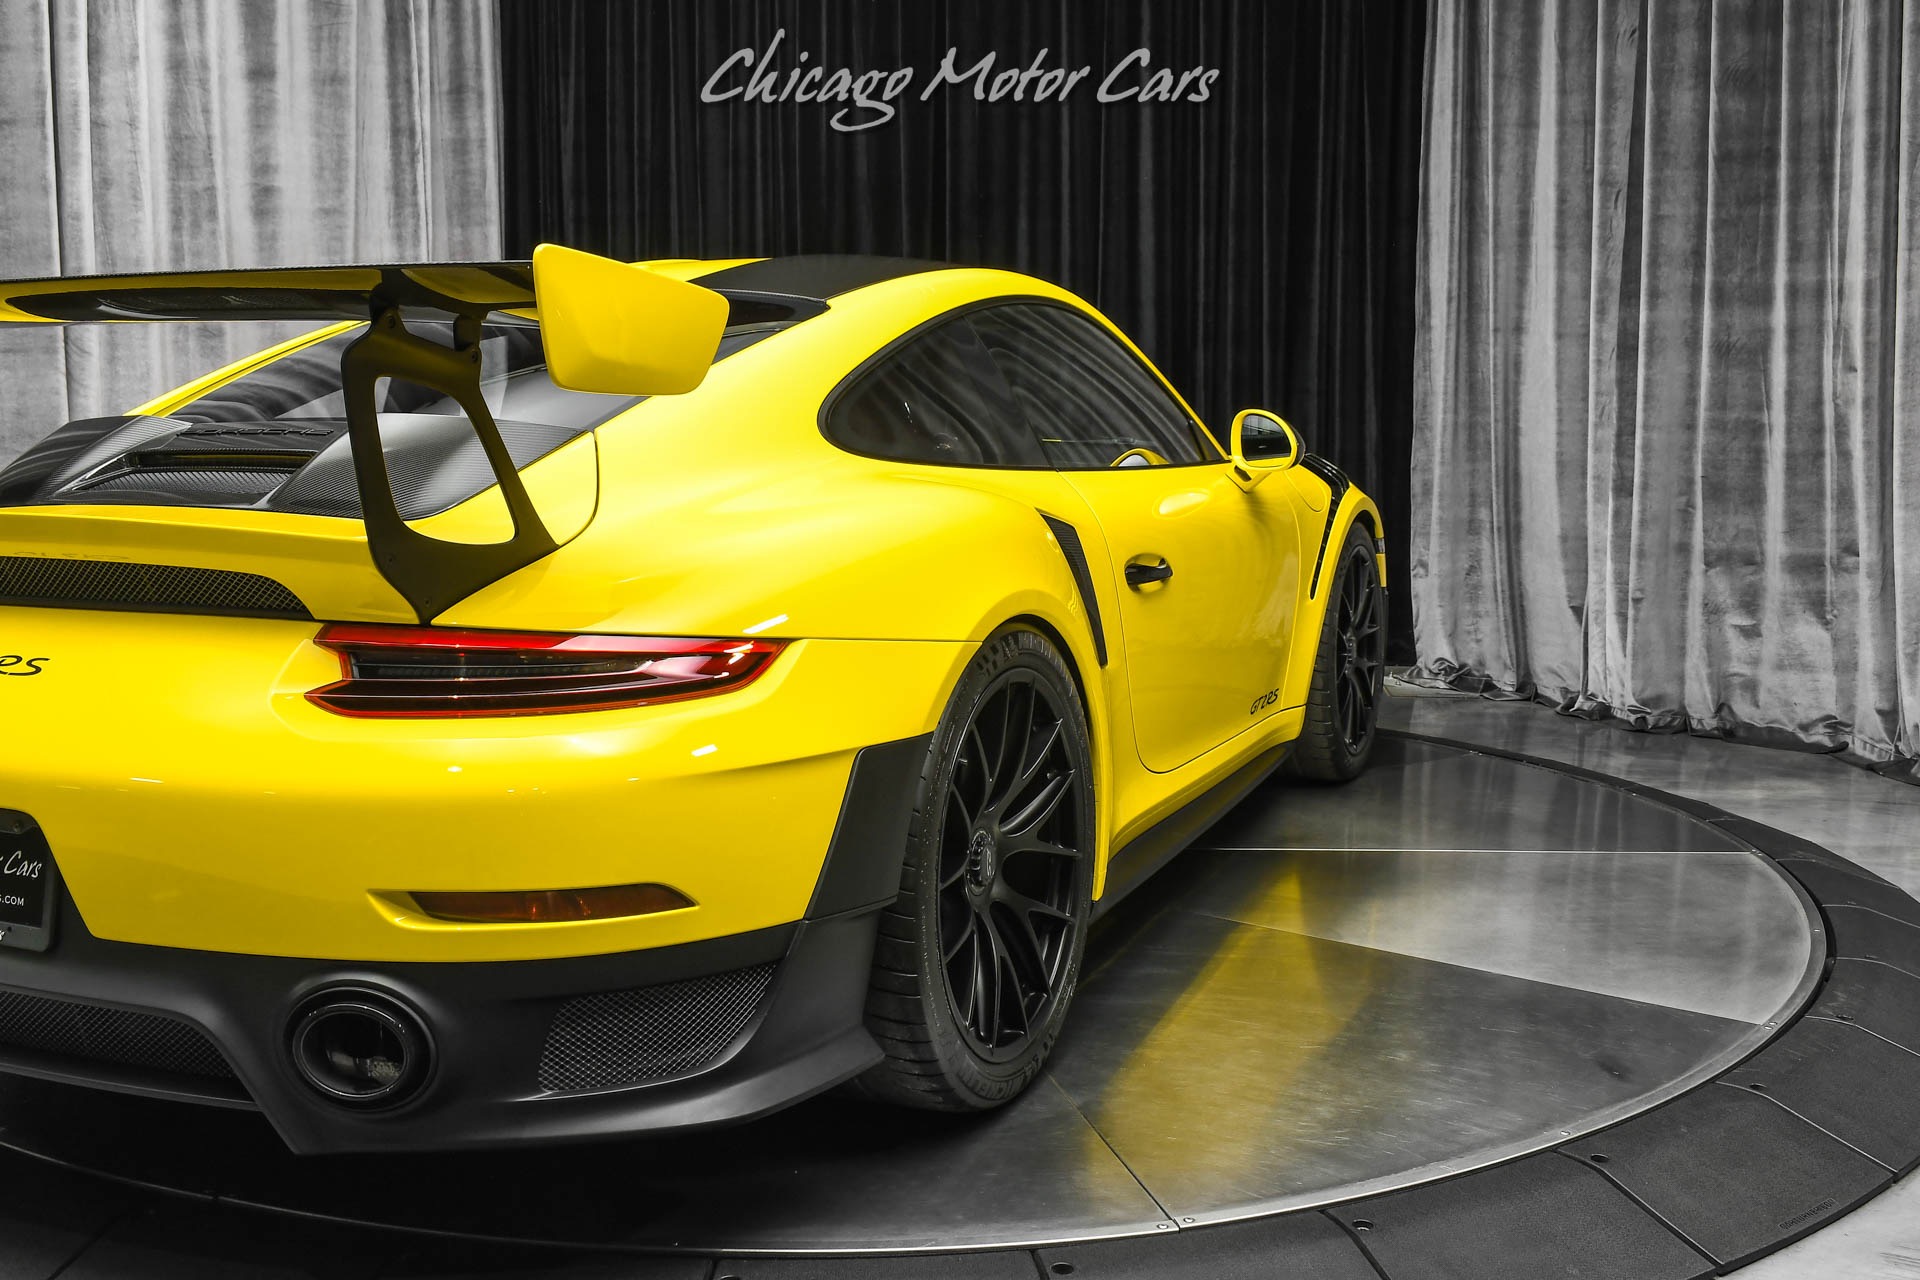 Used 2018 Porsche 911 GT2 RS Weissach Package ONLY 2k Miles! Magnesium  Wheels! Carbon! LOADED! For Sale (Special Pricing) | Chicago Motor Cars  Stock #20576